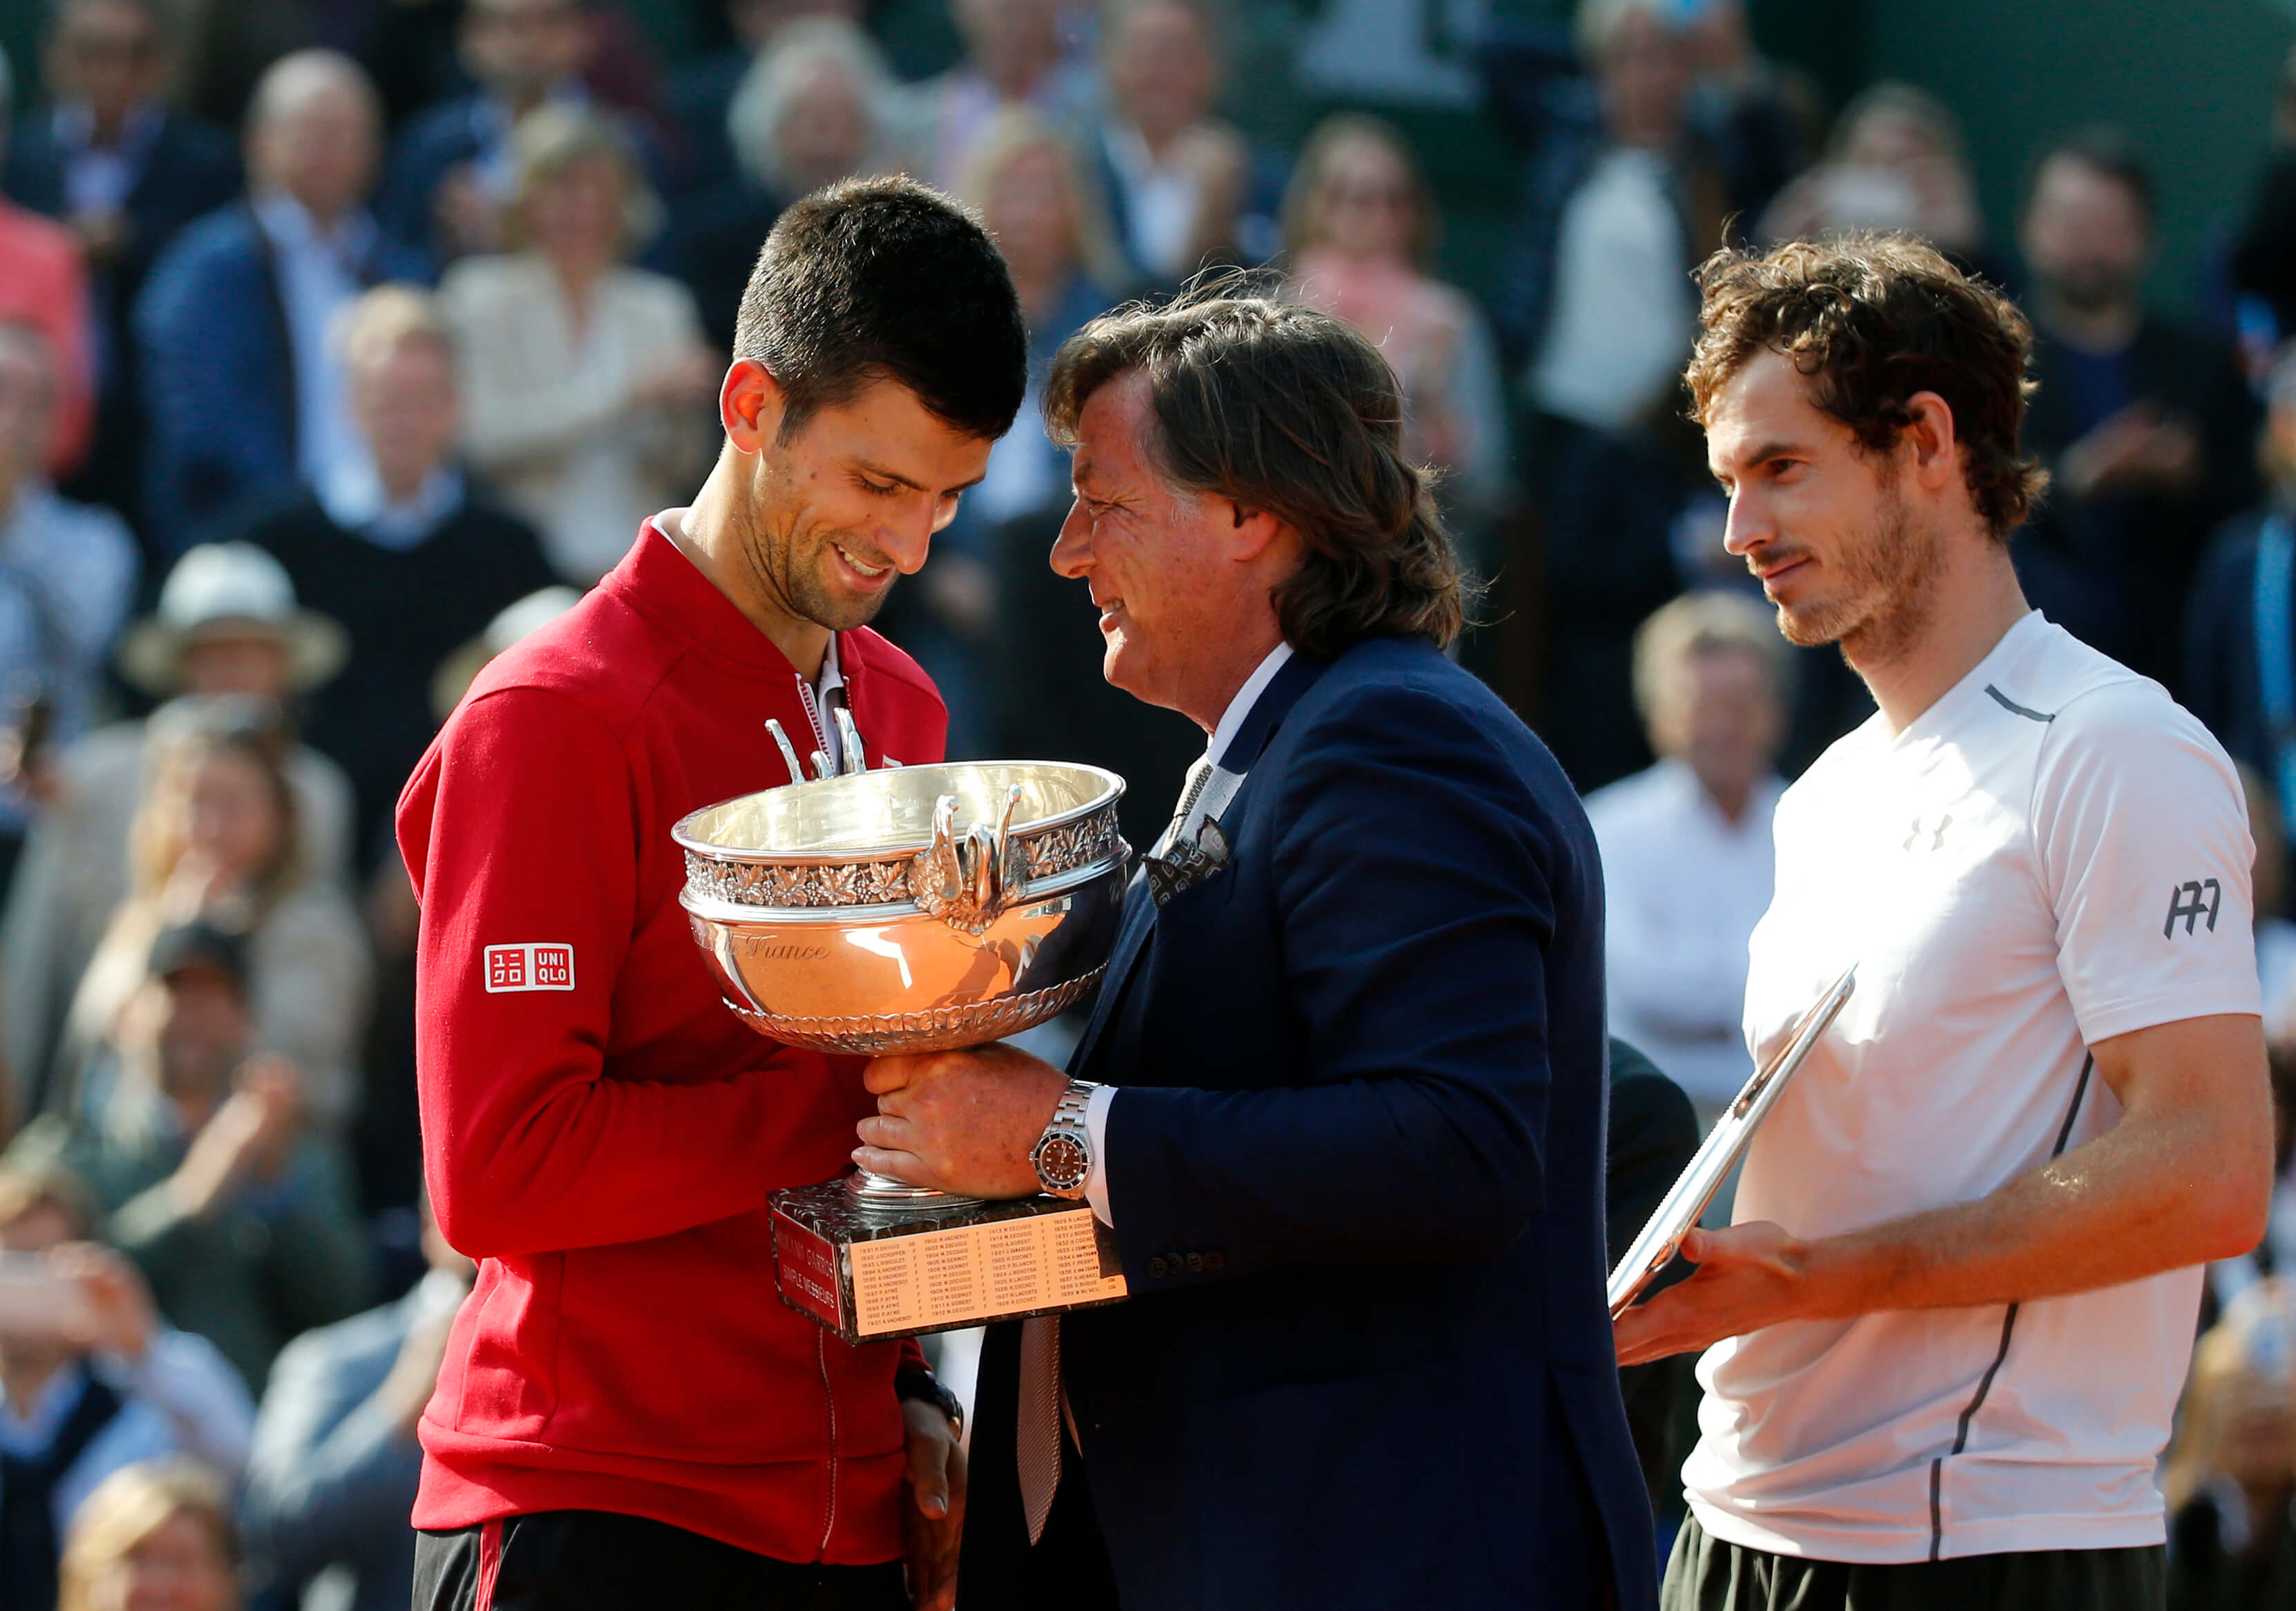 Image of Novak Djokovic receiving trophy after winning the French Open